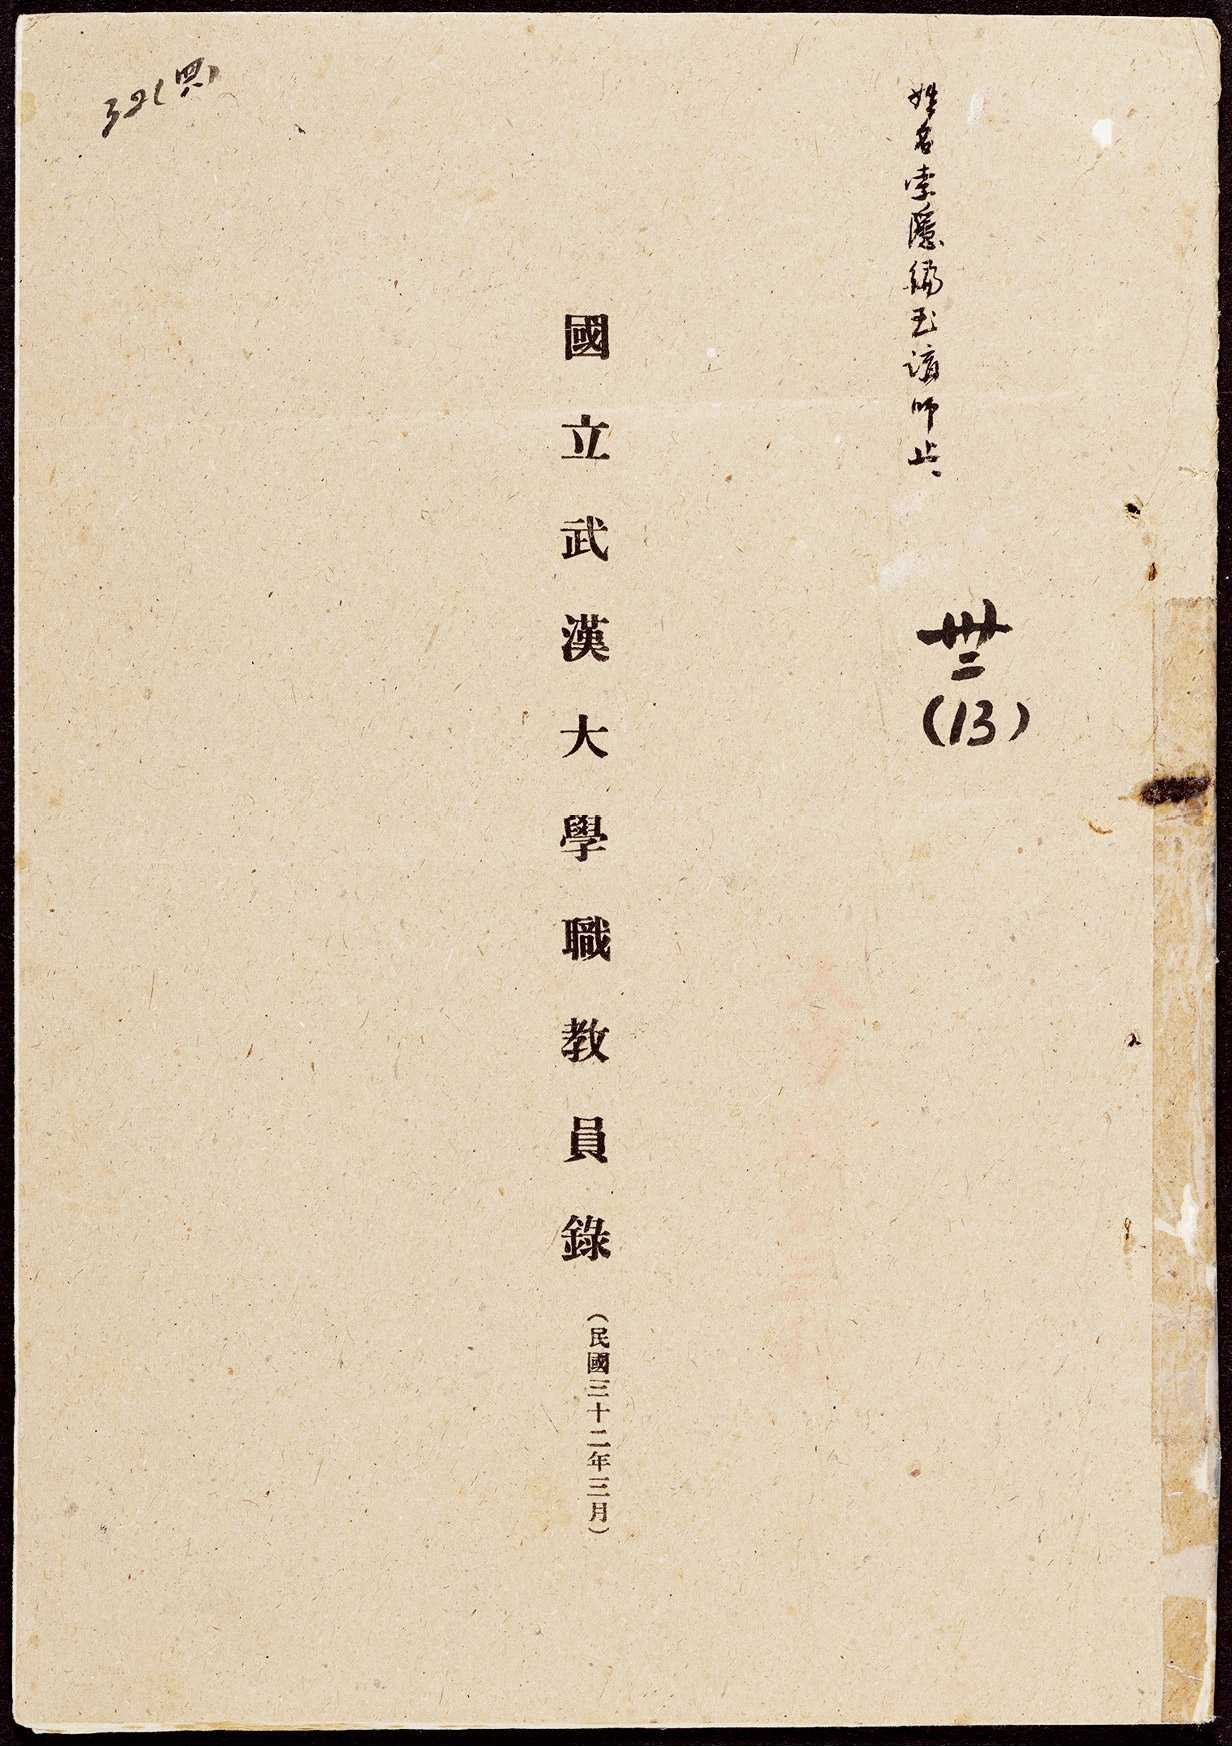 One volume "National Wuhan University Teachers’ Record"in the thirty-second year of the Republic of China (1943)